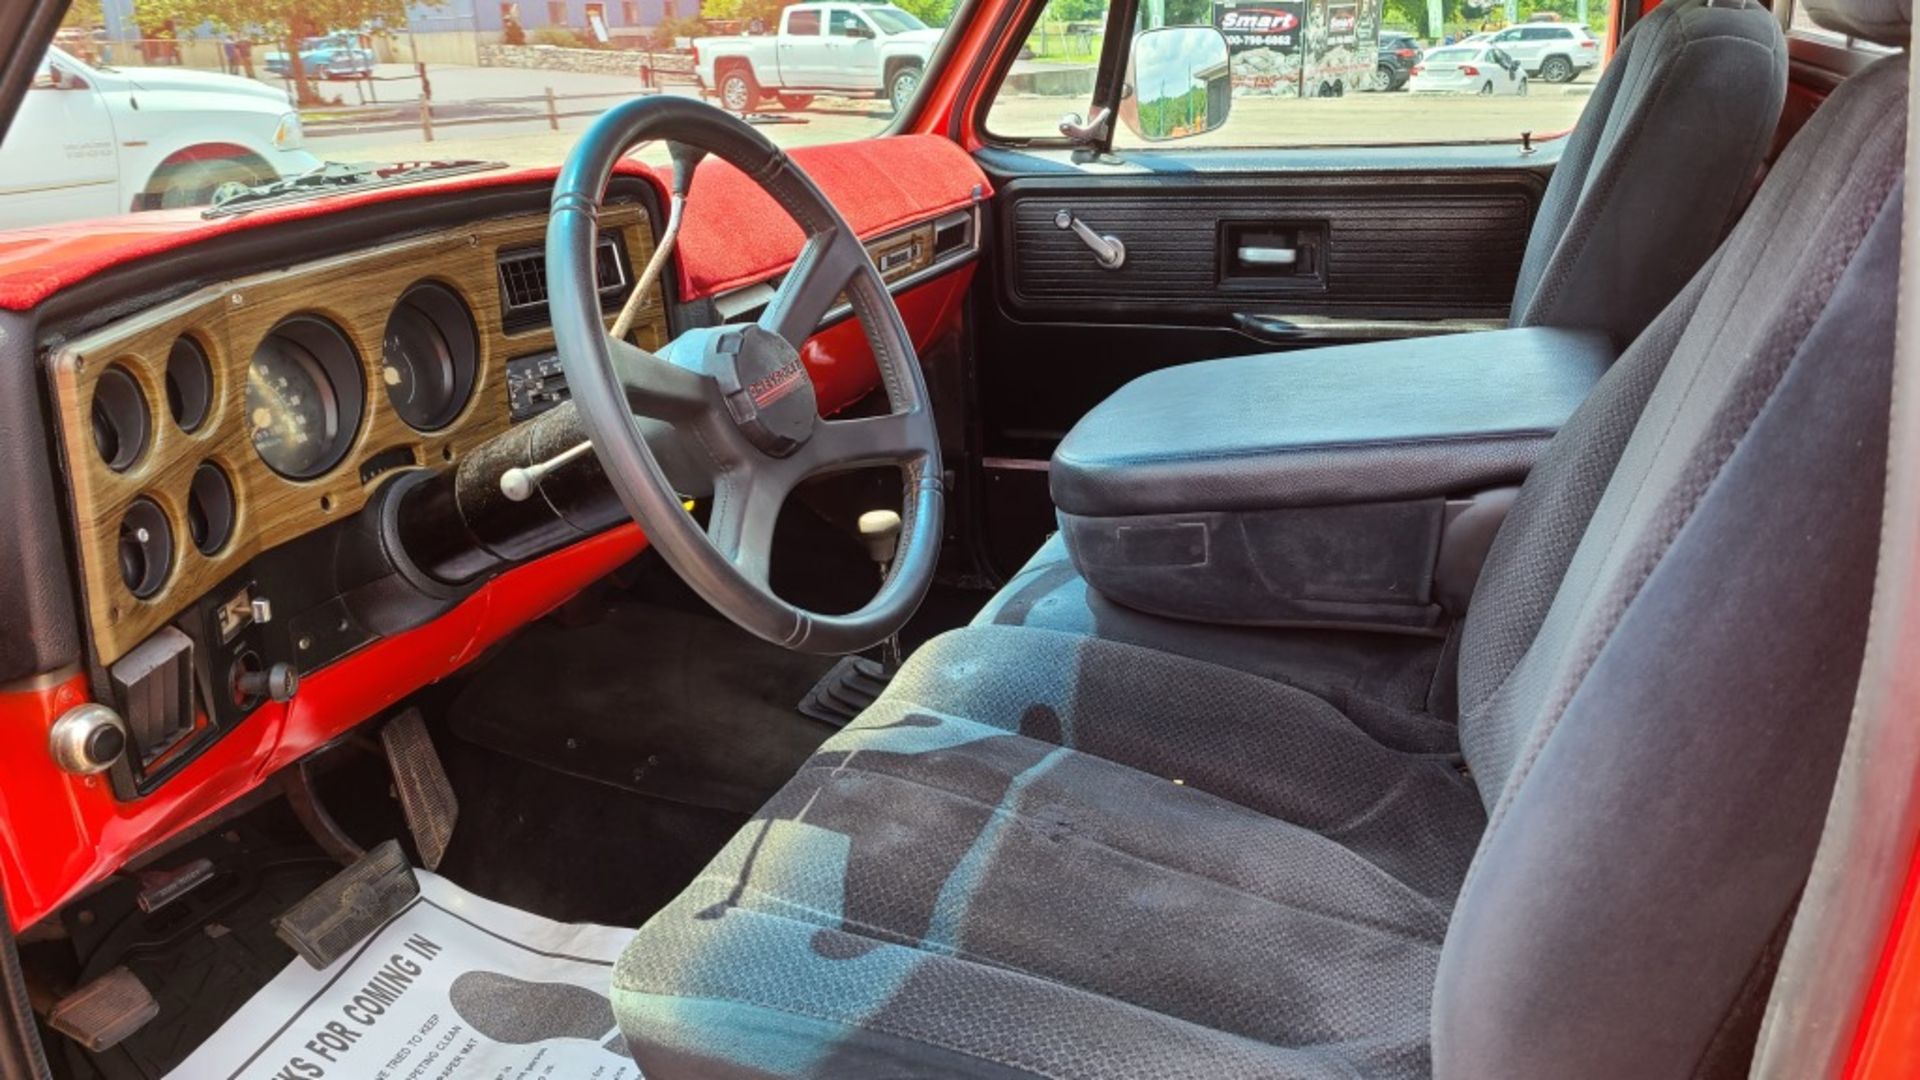 1977 Chevy K10 Pickup - Image 6 of 13